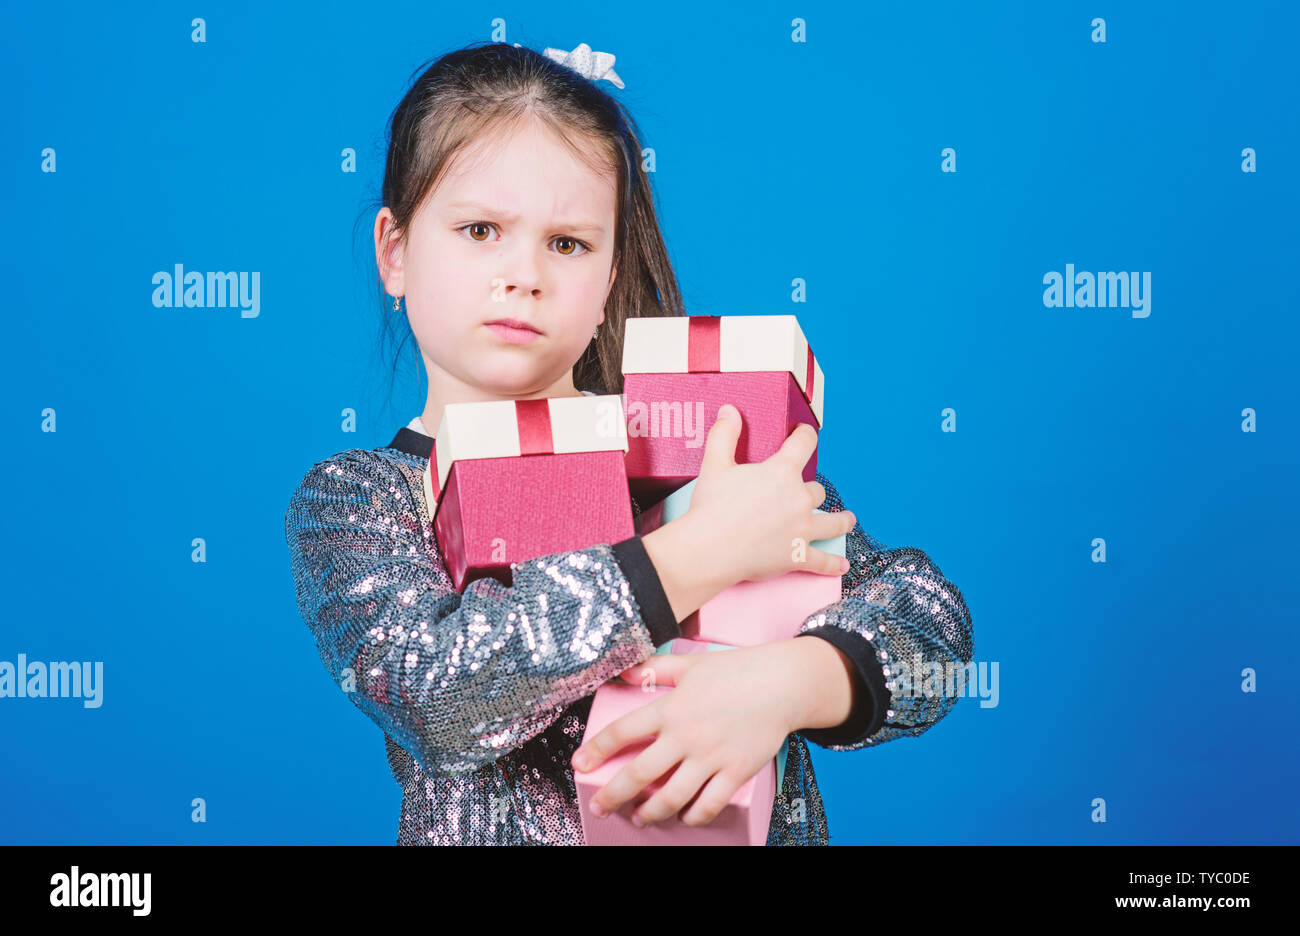 Only for me. Special happens every day. Girl with gift boxes blue background. Black friday. Shopping day. Child carry lot gift boxes. Surprise gift box. Birthday wish list. World of happiness. Stock Photo